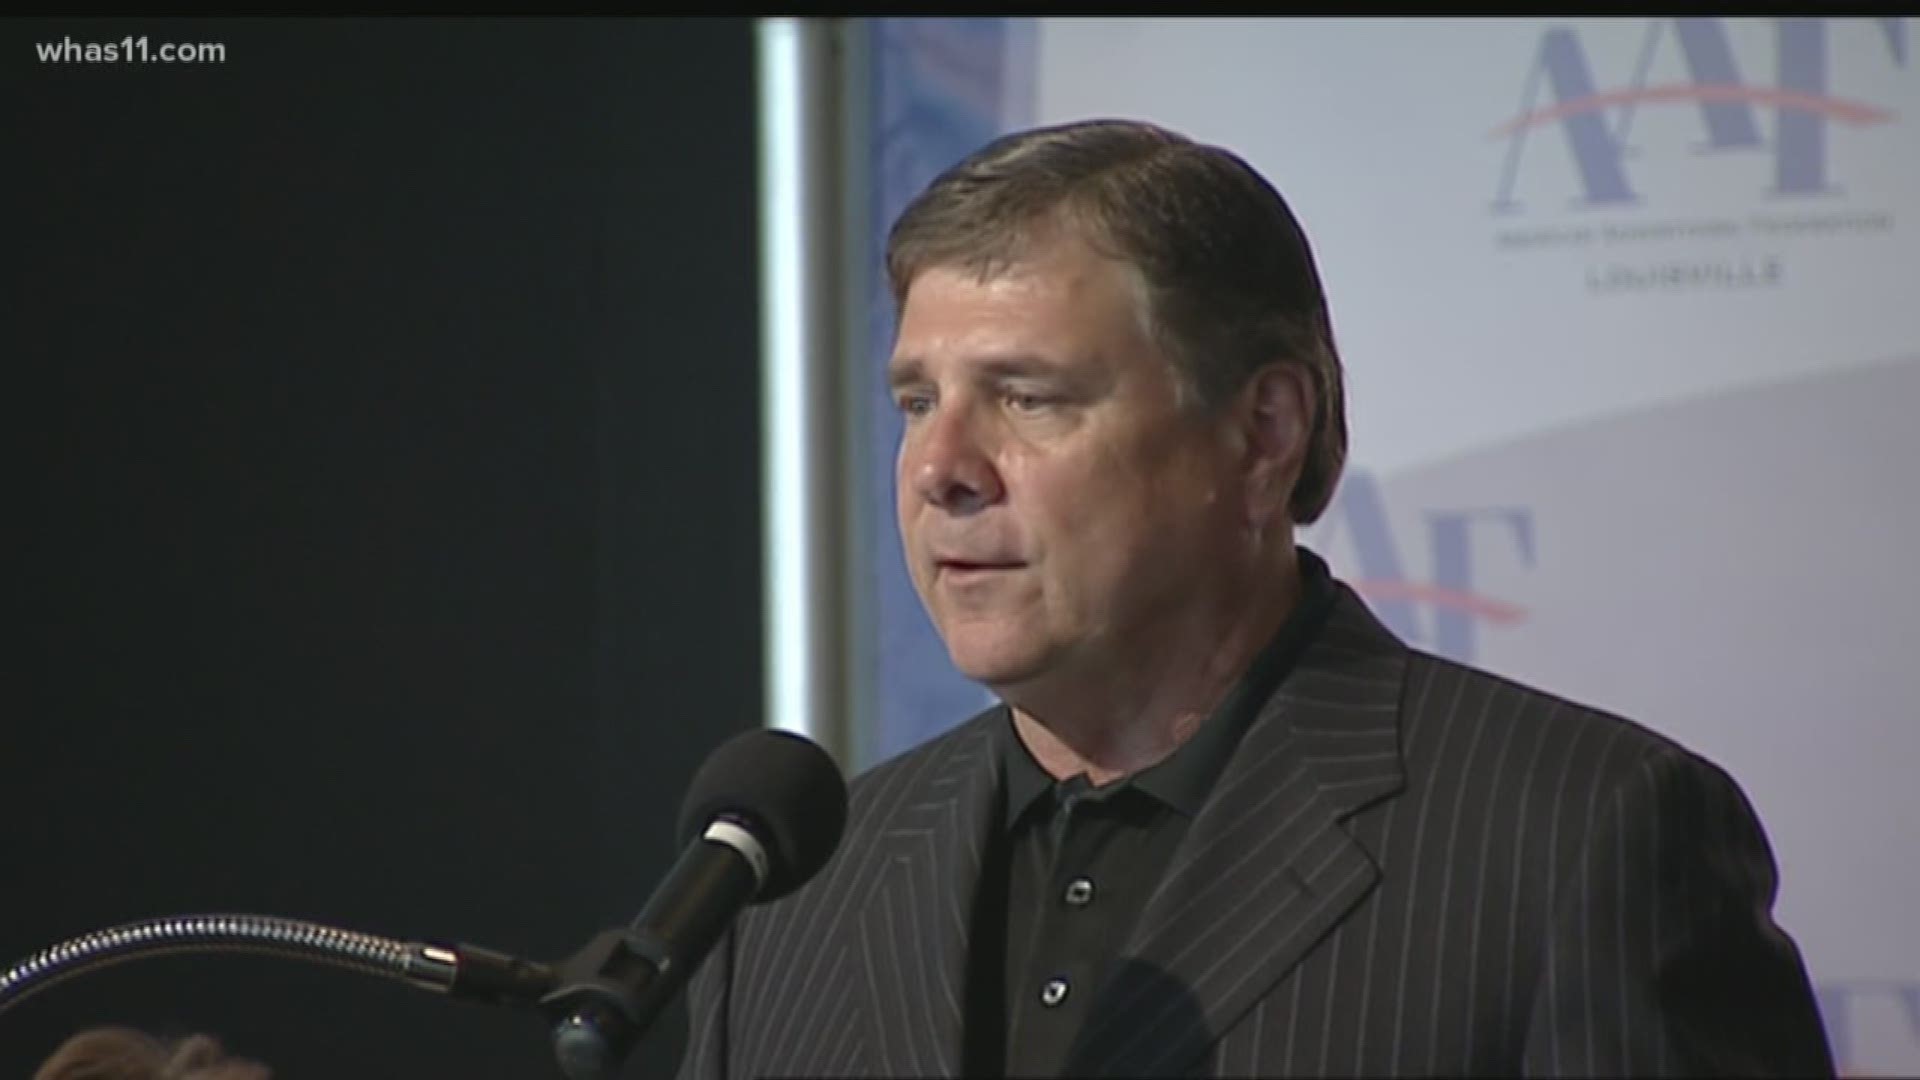 The University of Louisville has reached an agreement with fired Athletic Director Tom Jurich.